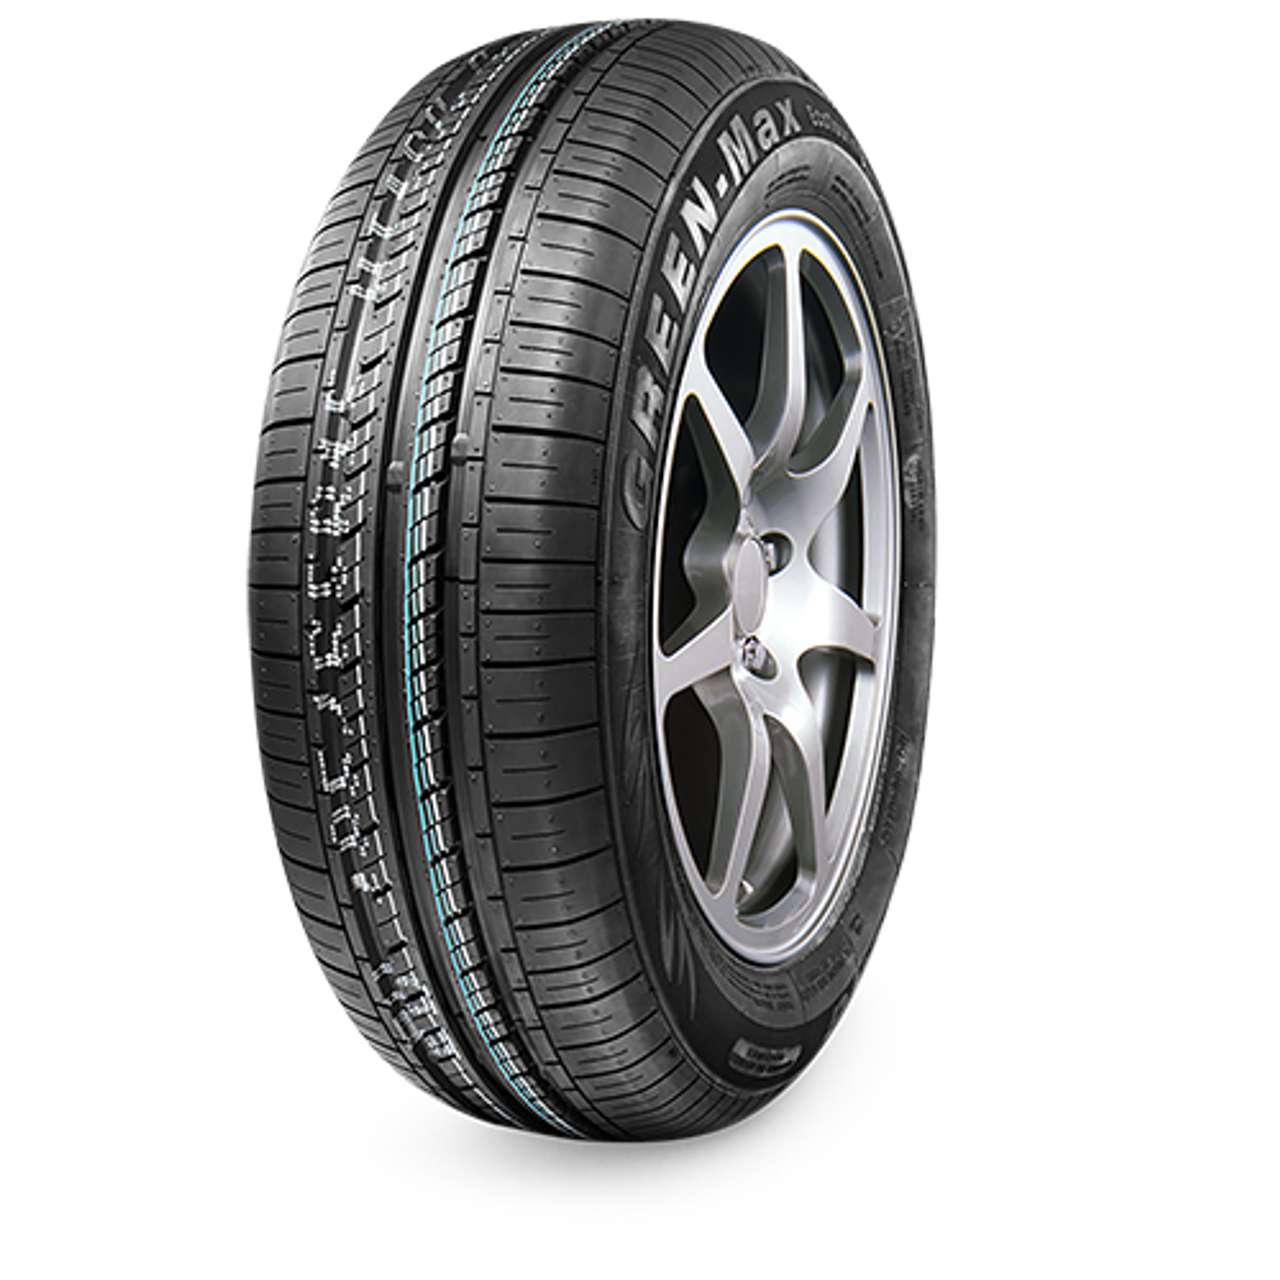 LINGLONG GREEN-MAX ECOTOURING 155/70R13 75T BSW von LINGLONG